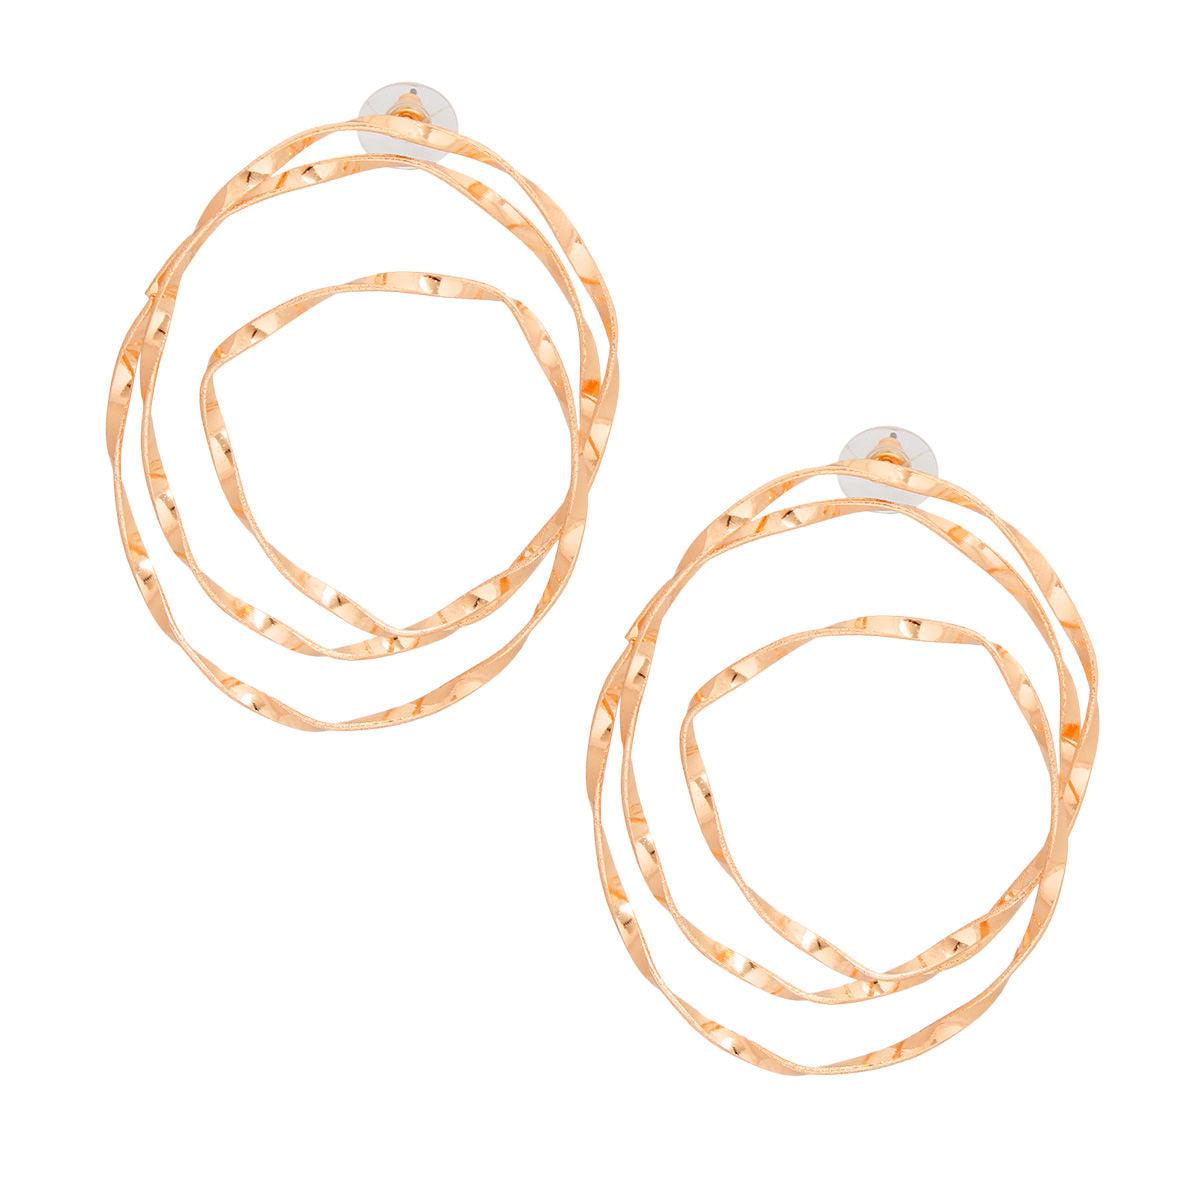 Gold Spiral Stud Earrings: Spin Your Look Up a Notch